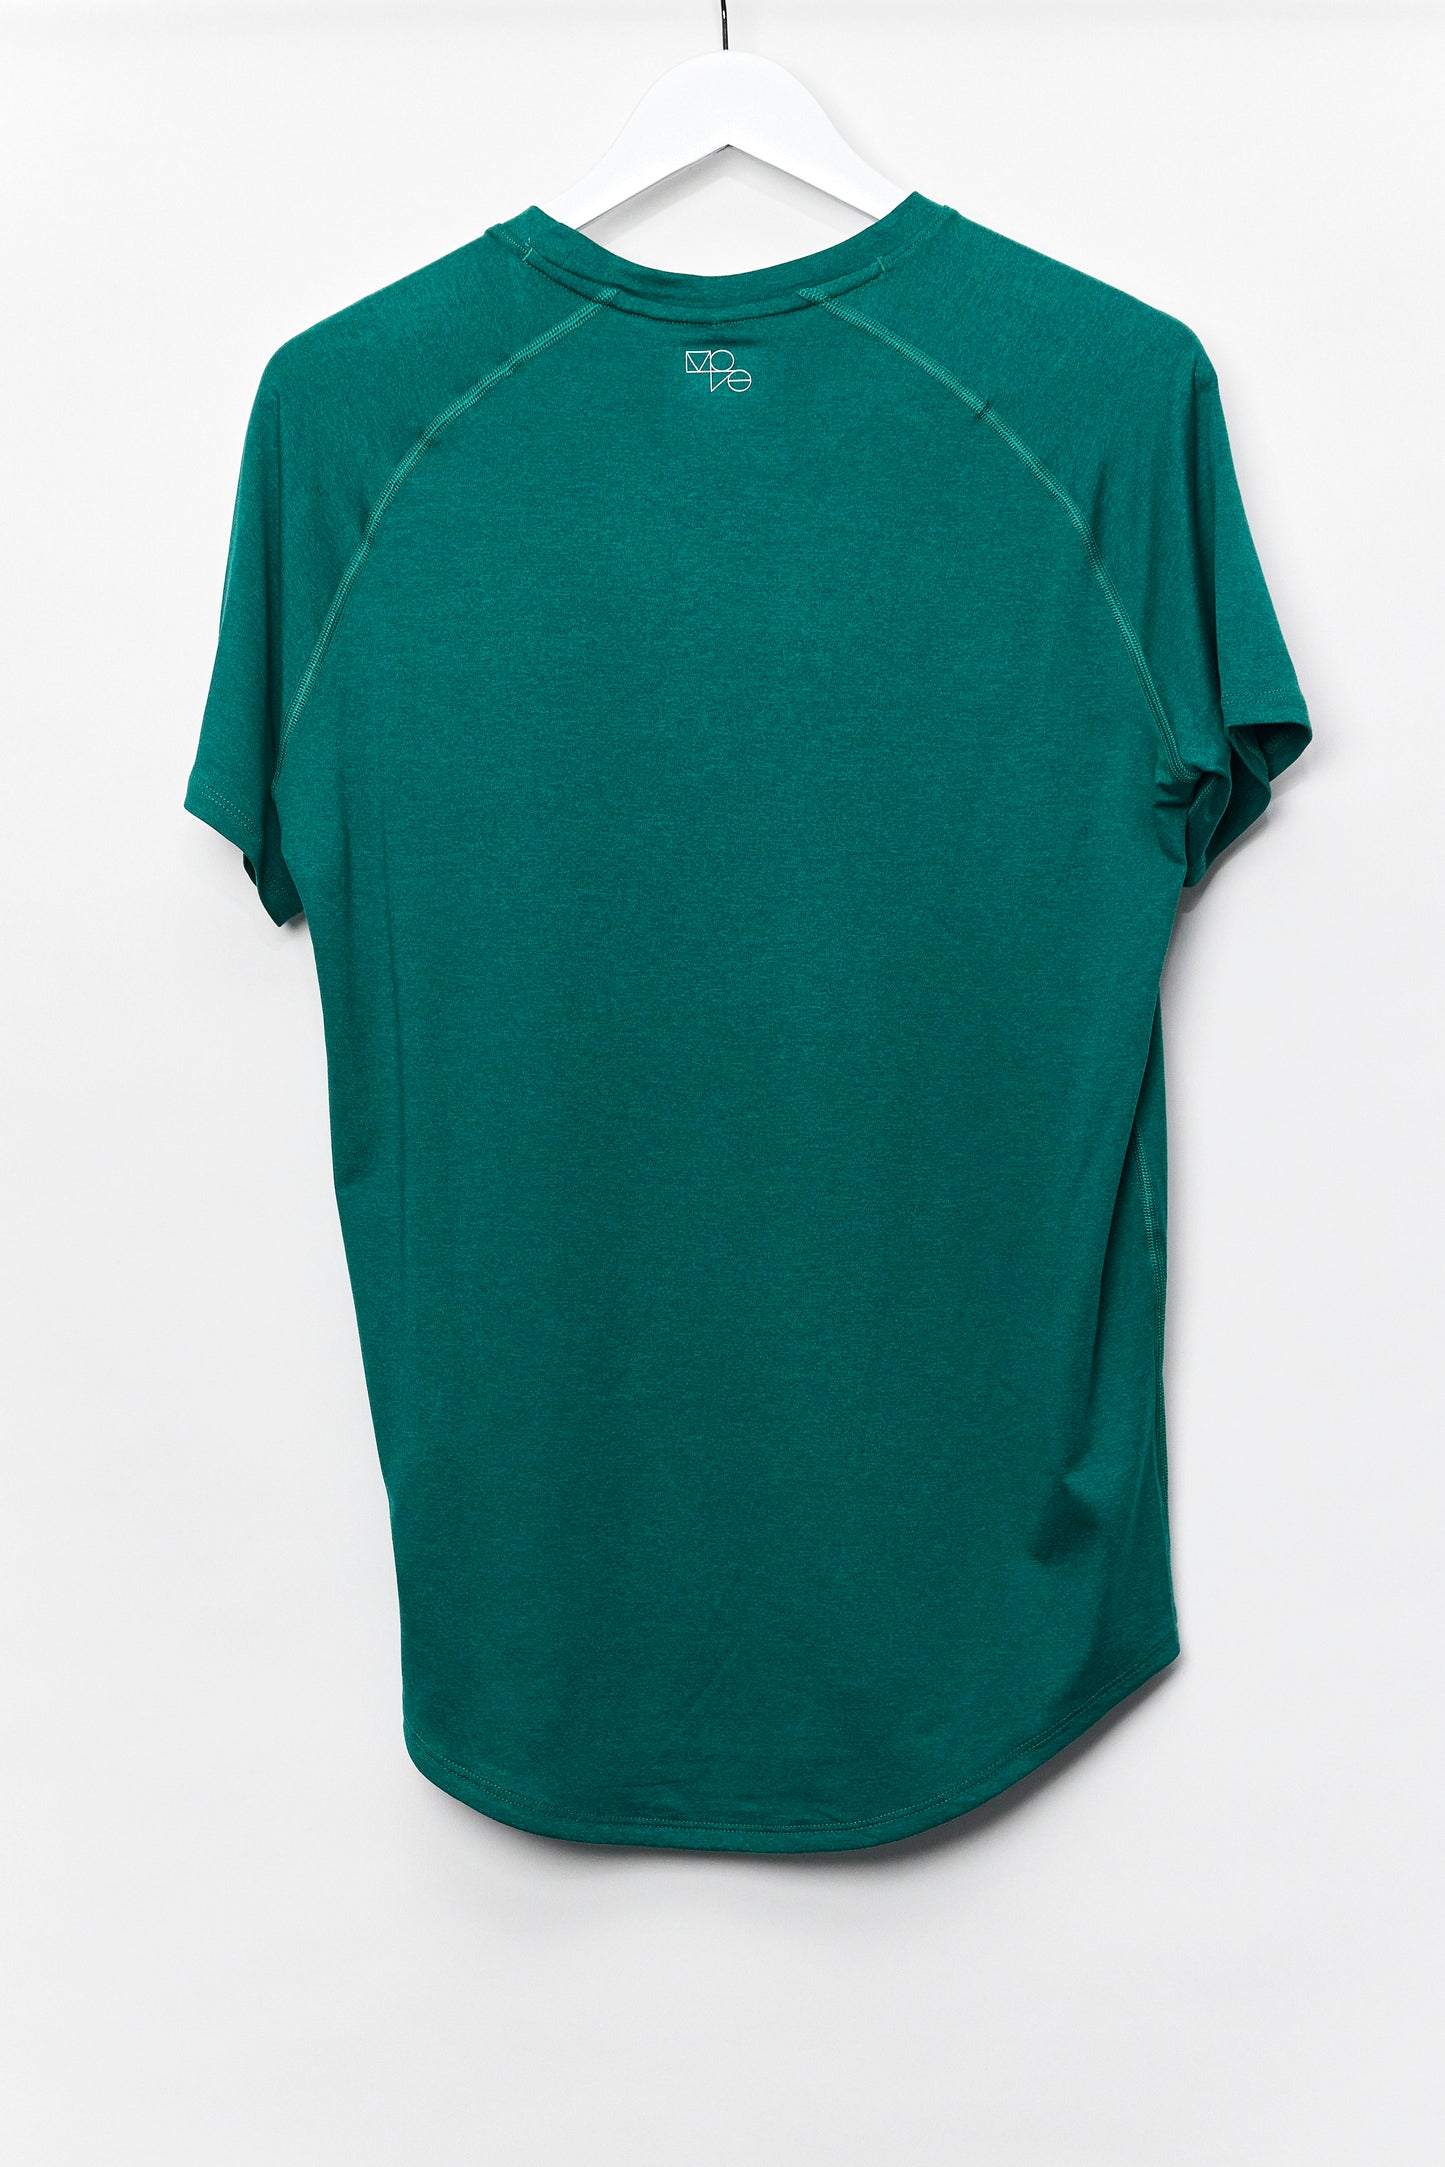 Mens M&S Move Green Sport Top size Small